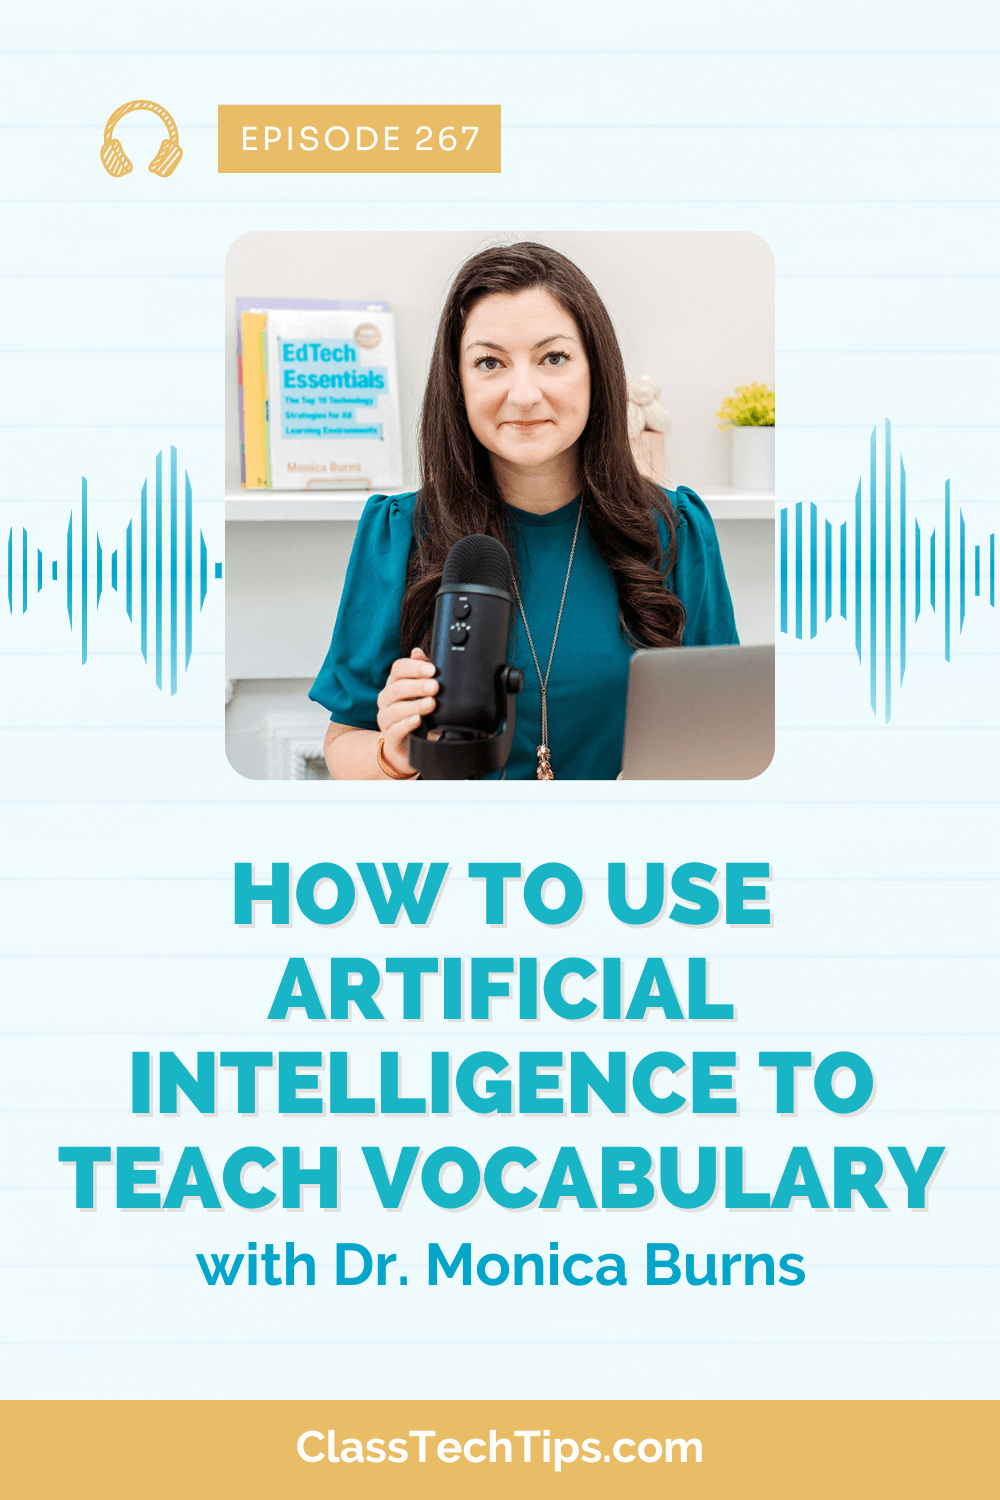 Podcast episode cover featuring Dr. Monica Burns discussing how to use artificial intelligence to teach vocabulary. Dr. Burns is seated in front of a microphone with a bookshelf in the background displaying her book 'EdTech Essentials.' The episode is titled 'How to Use Artificial Intelligence to Teach Vocabulary,' part of the Easy EdTech Podcast, episode 267.